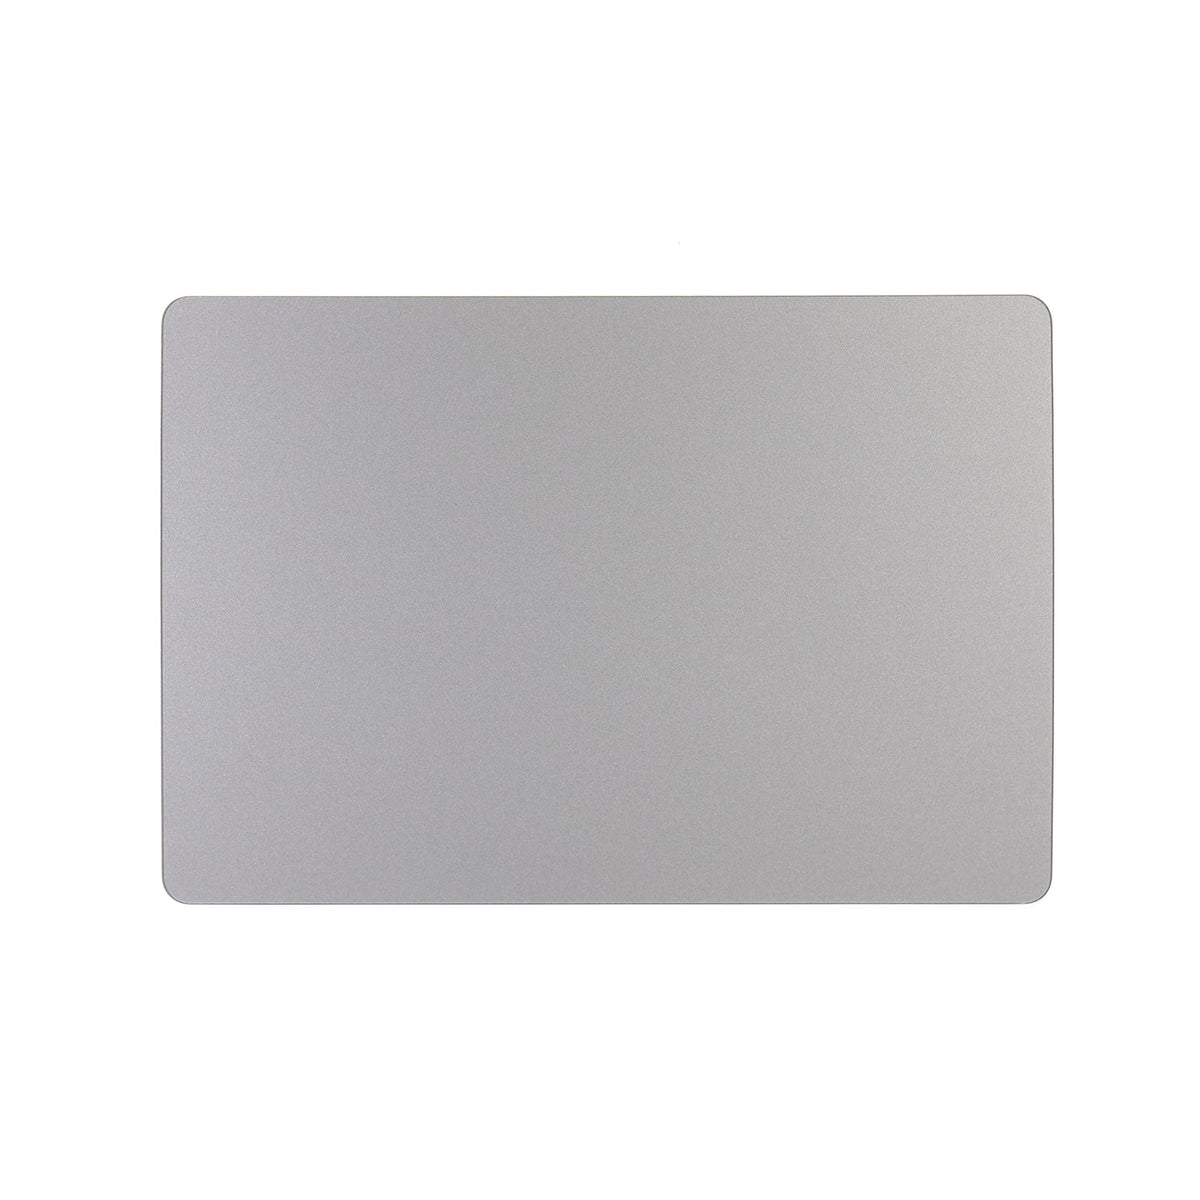 SPACE GRAY TRACKPAD FOR MACBOOK AIR 13" RETINA A1932 (LATE 2018, MID 2019)